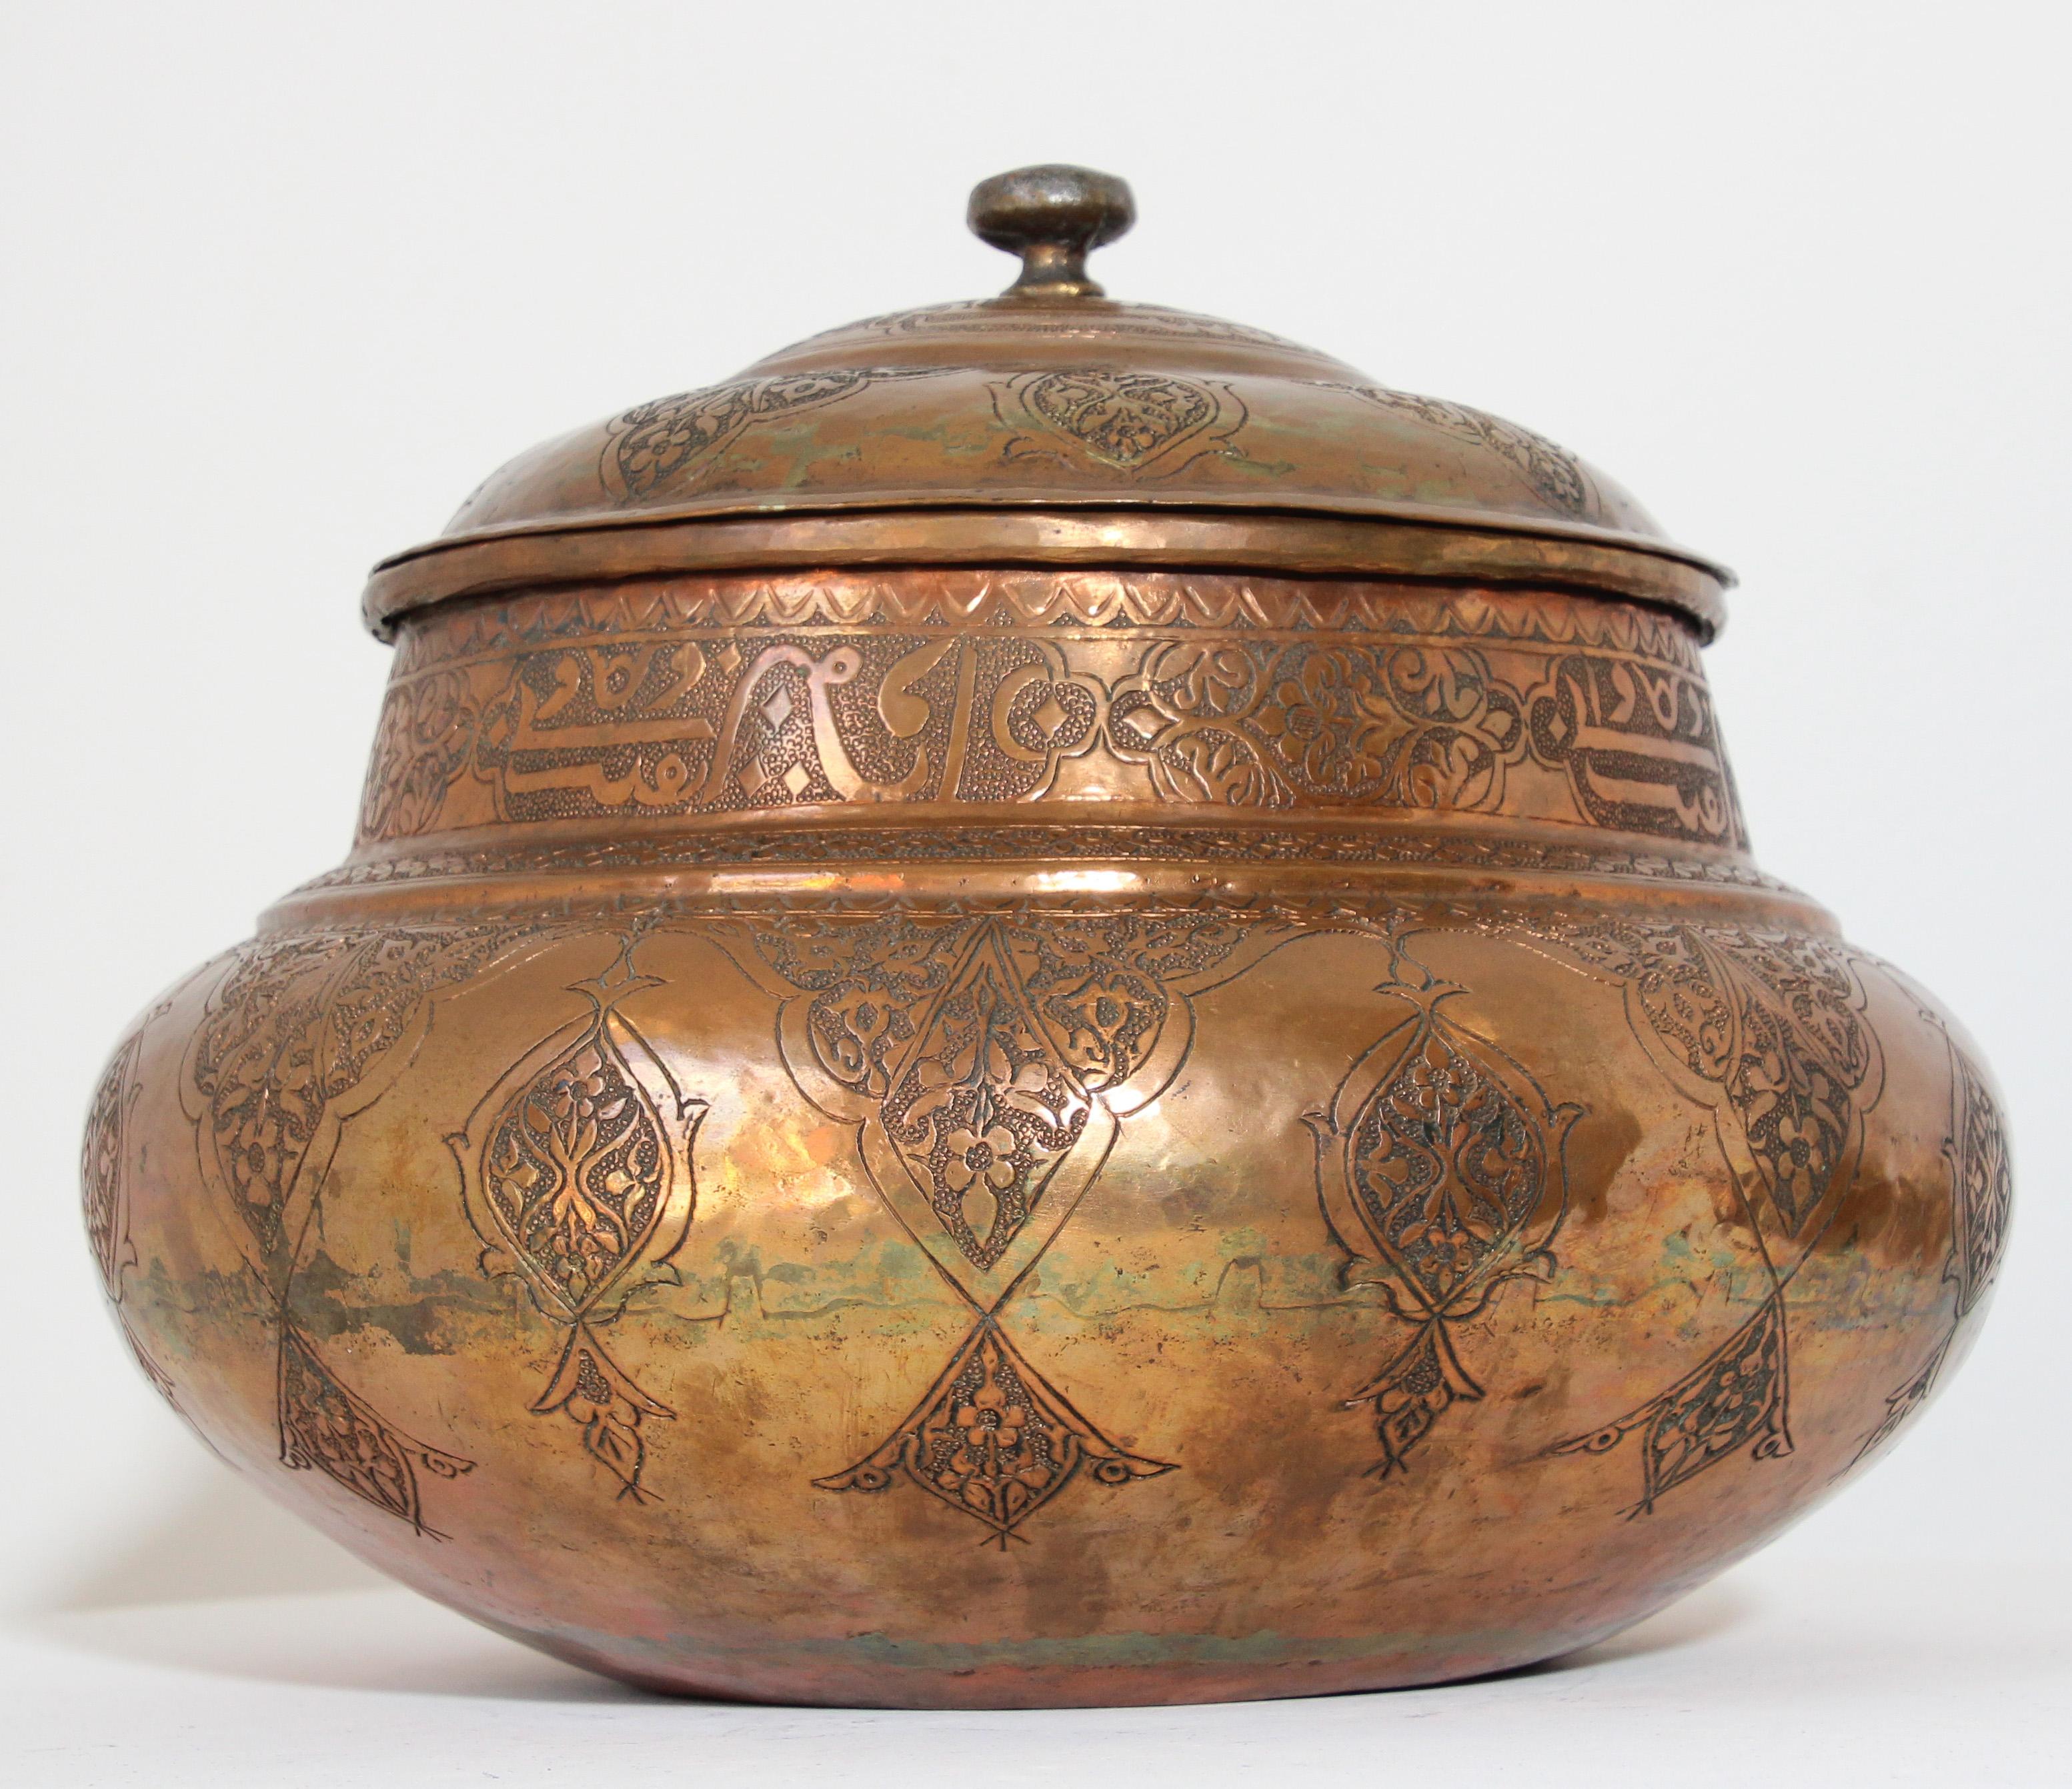 Indo Persian Mughal tinned copper vessel.
Large Middle Eastern Persian Mameluke style tinned copper jar with lid.
Heavily hand-hammered and chased with Kufic script and geometric Islamic Moorish interlace.
Great Asian Islamic metalwork collectible